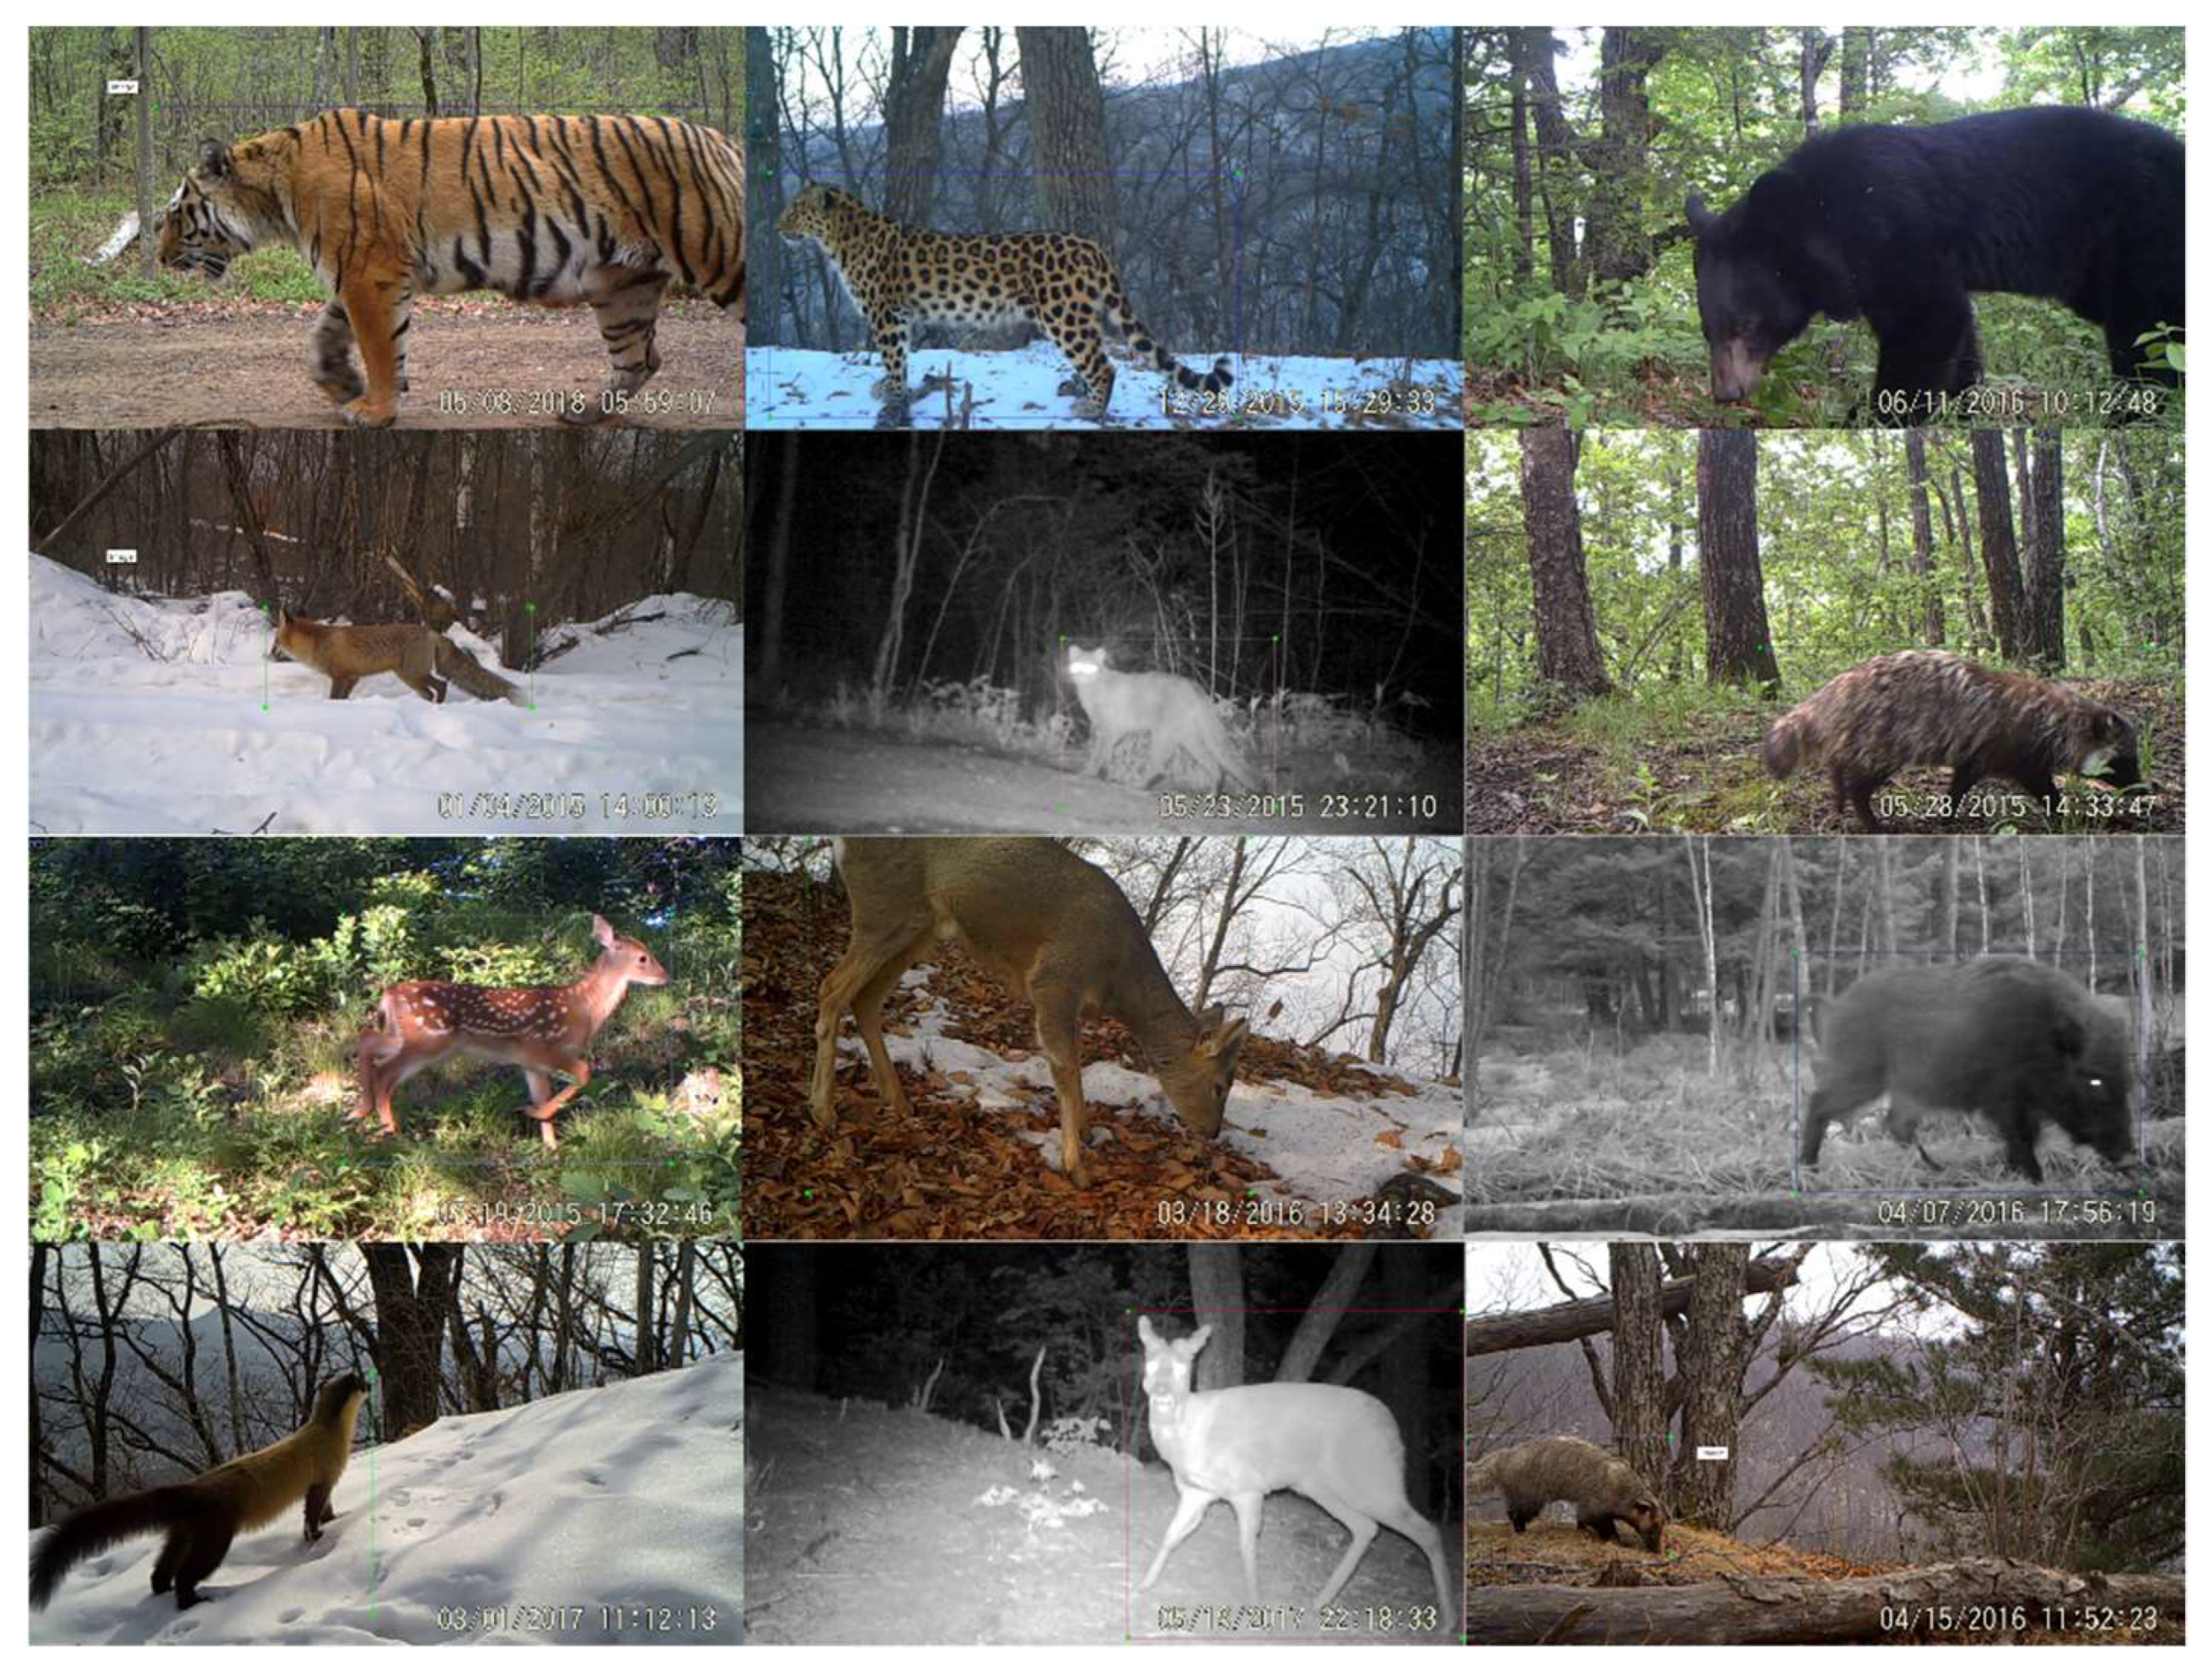 Animals | Free Full-Text | Animal Detection and Classification from Camera  Trap Images Using Different Mainstream Object Detection Architectures